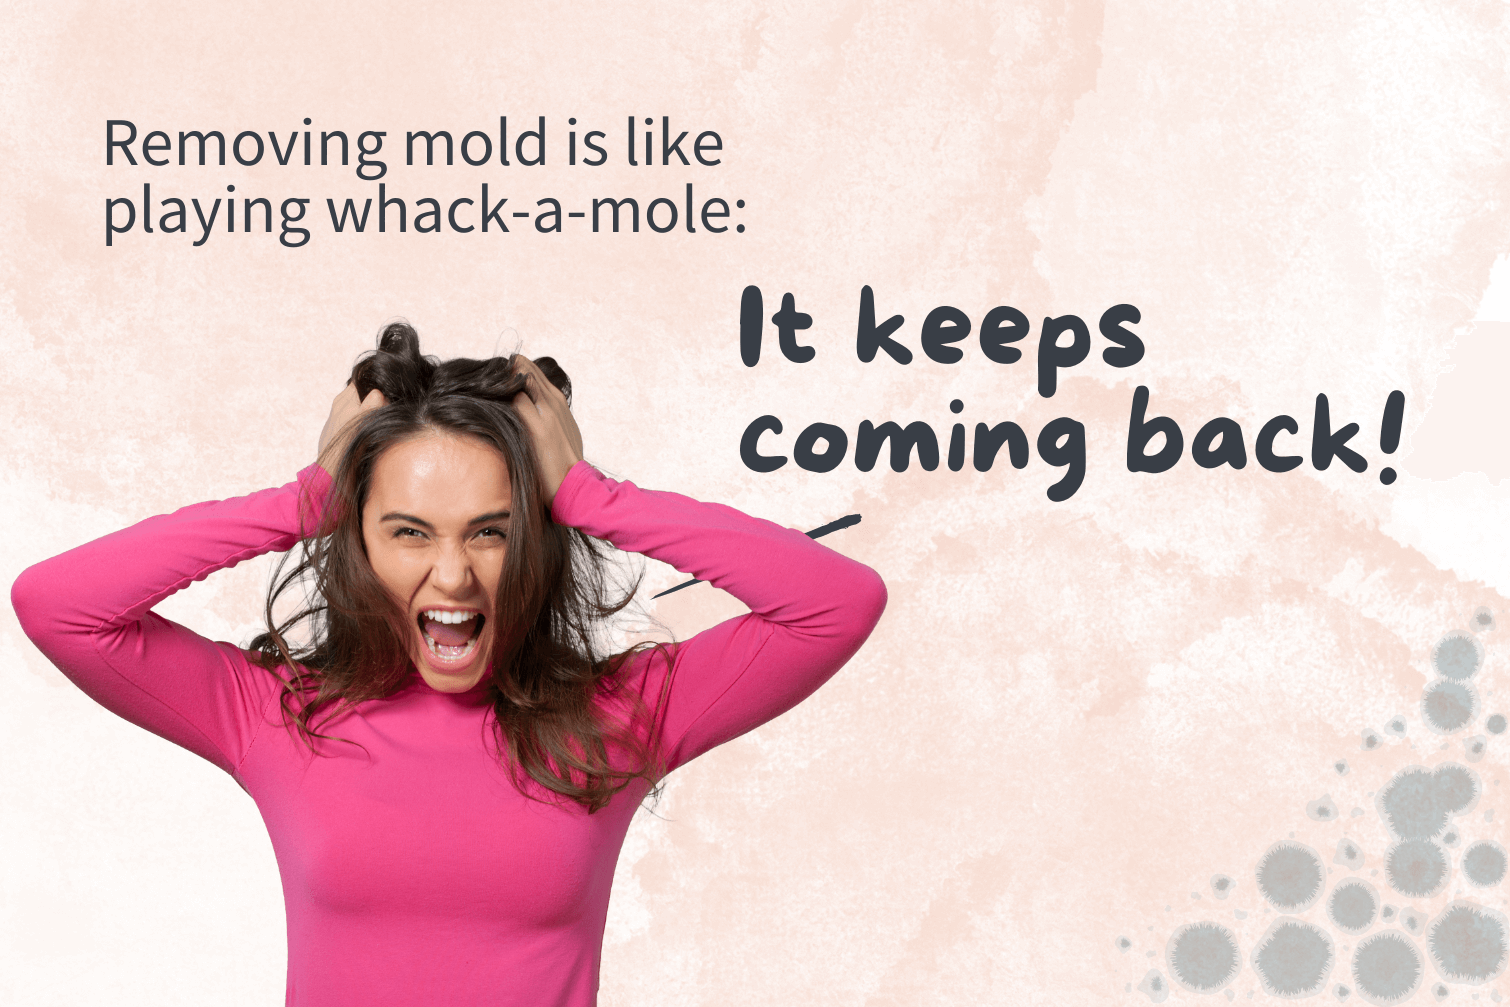 Removing mold is like playing whack-a-mole: it keeps coming back!